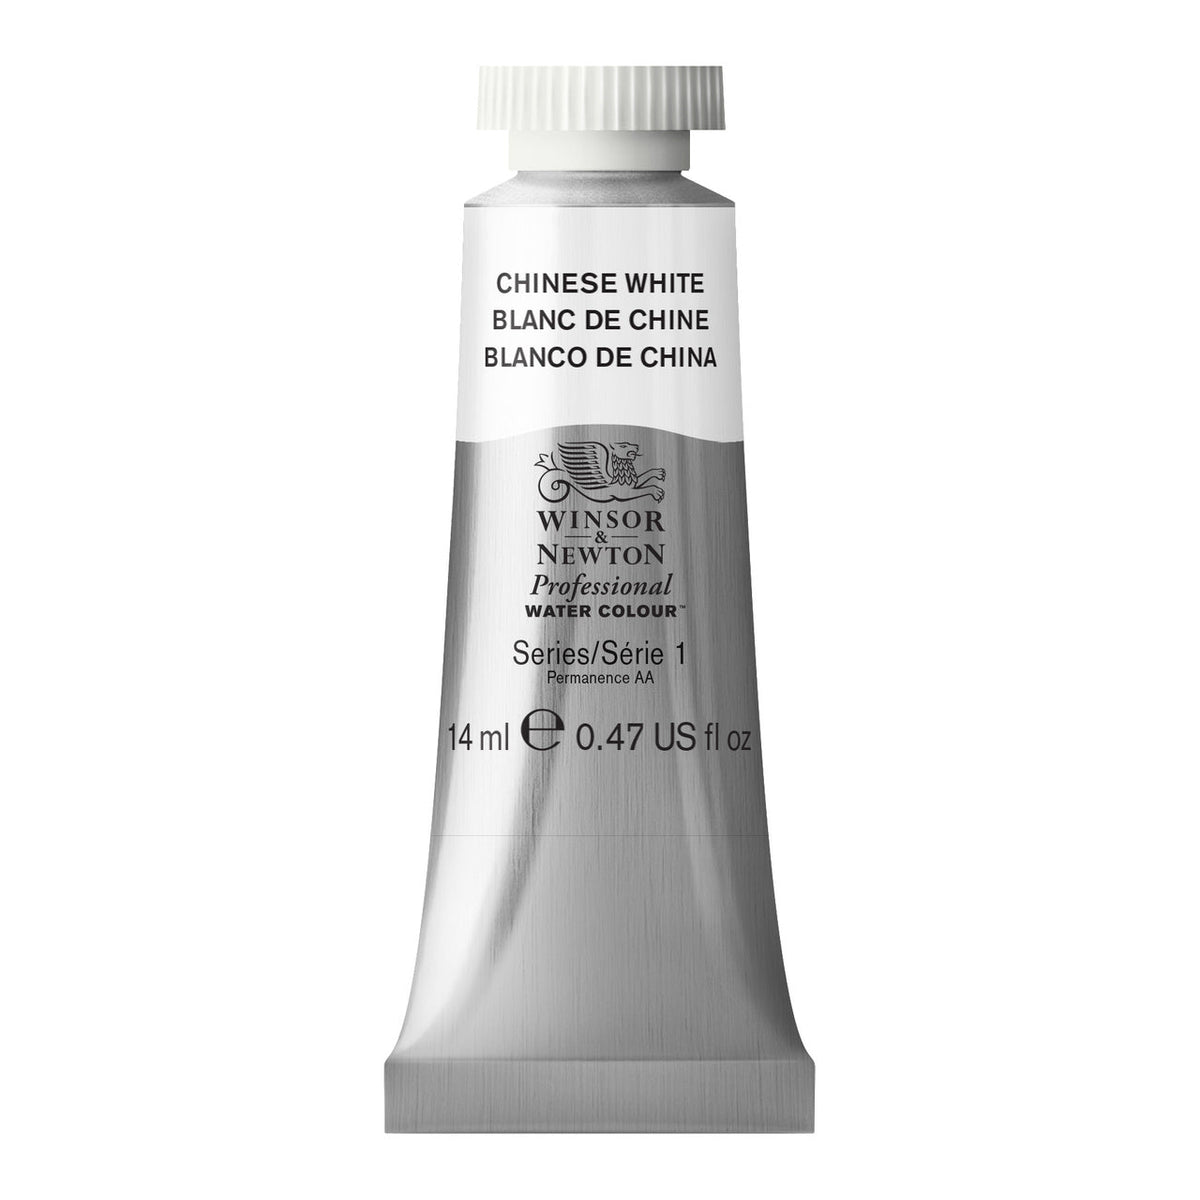 Winsor & Newton Professional Watercolor Chinese White 14ml - merriartist.com